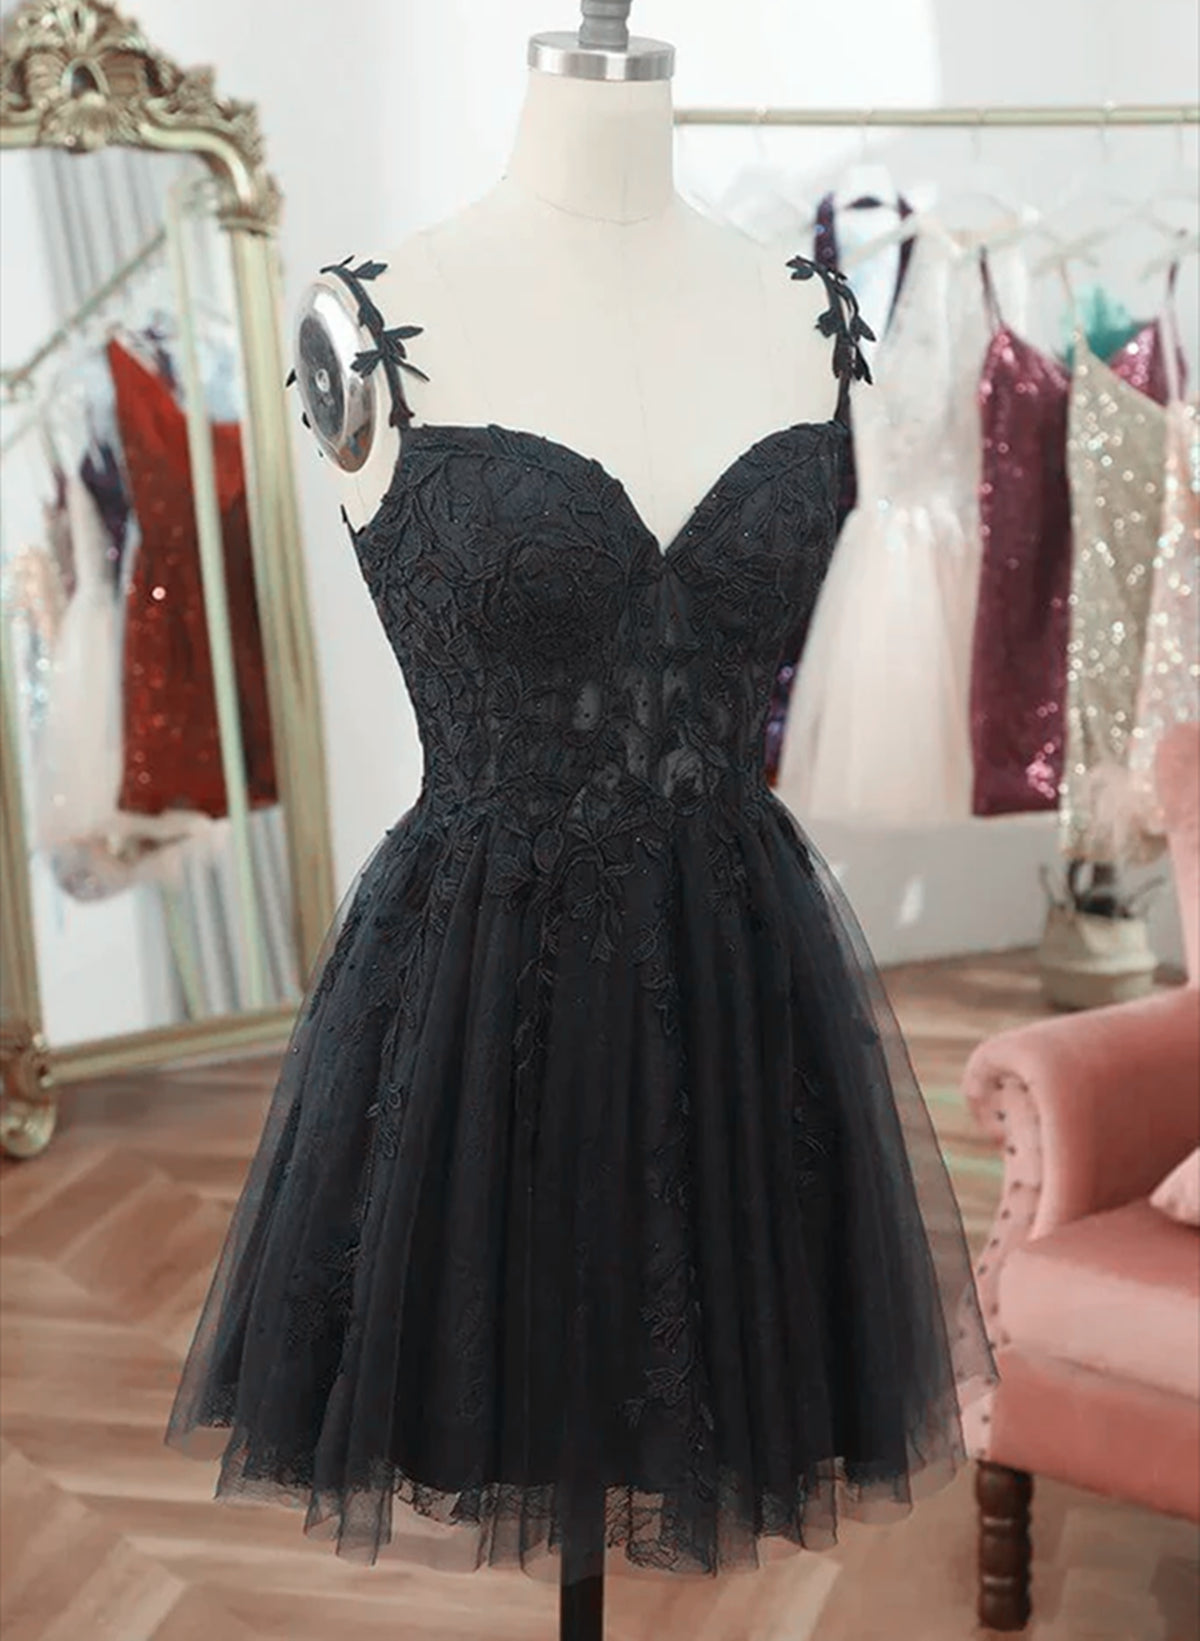 Chic Black Lace Straps Tulle Short Party Drss, Black Sweetheart Corset Homecoming Dress outfit, Bridesmaid Dresses Shops